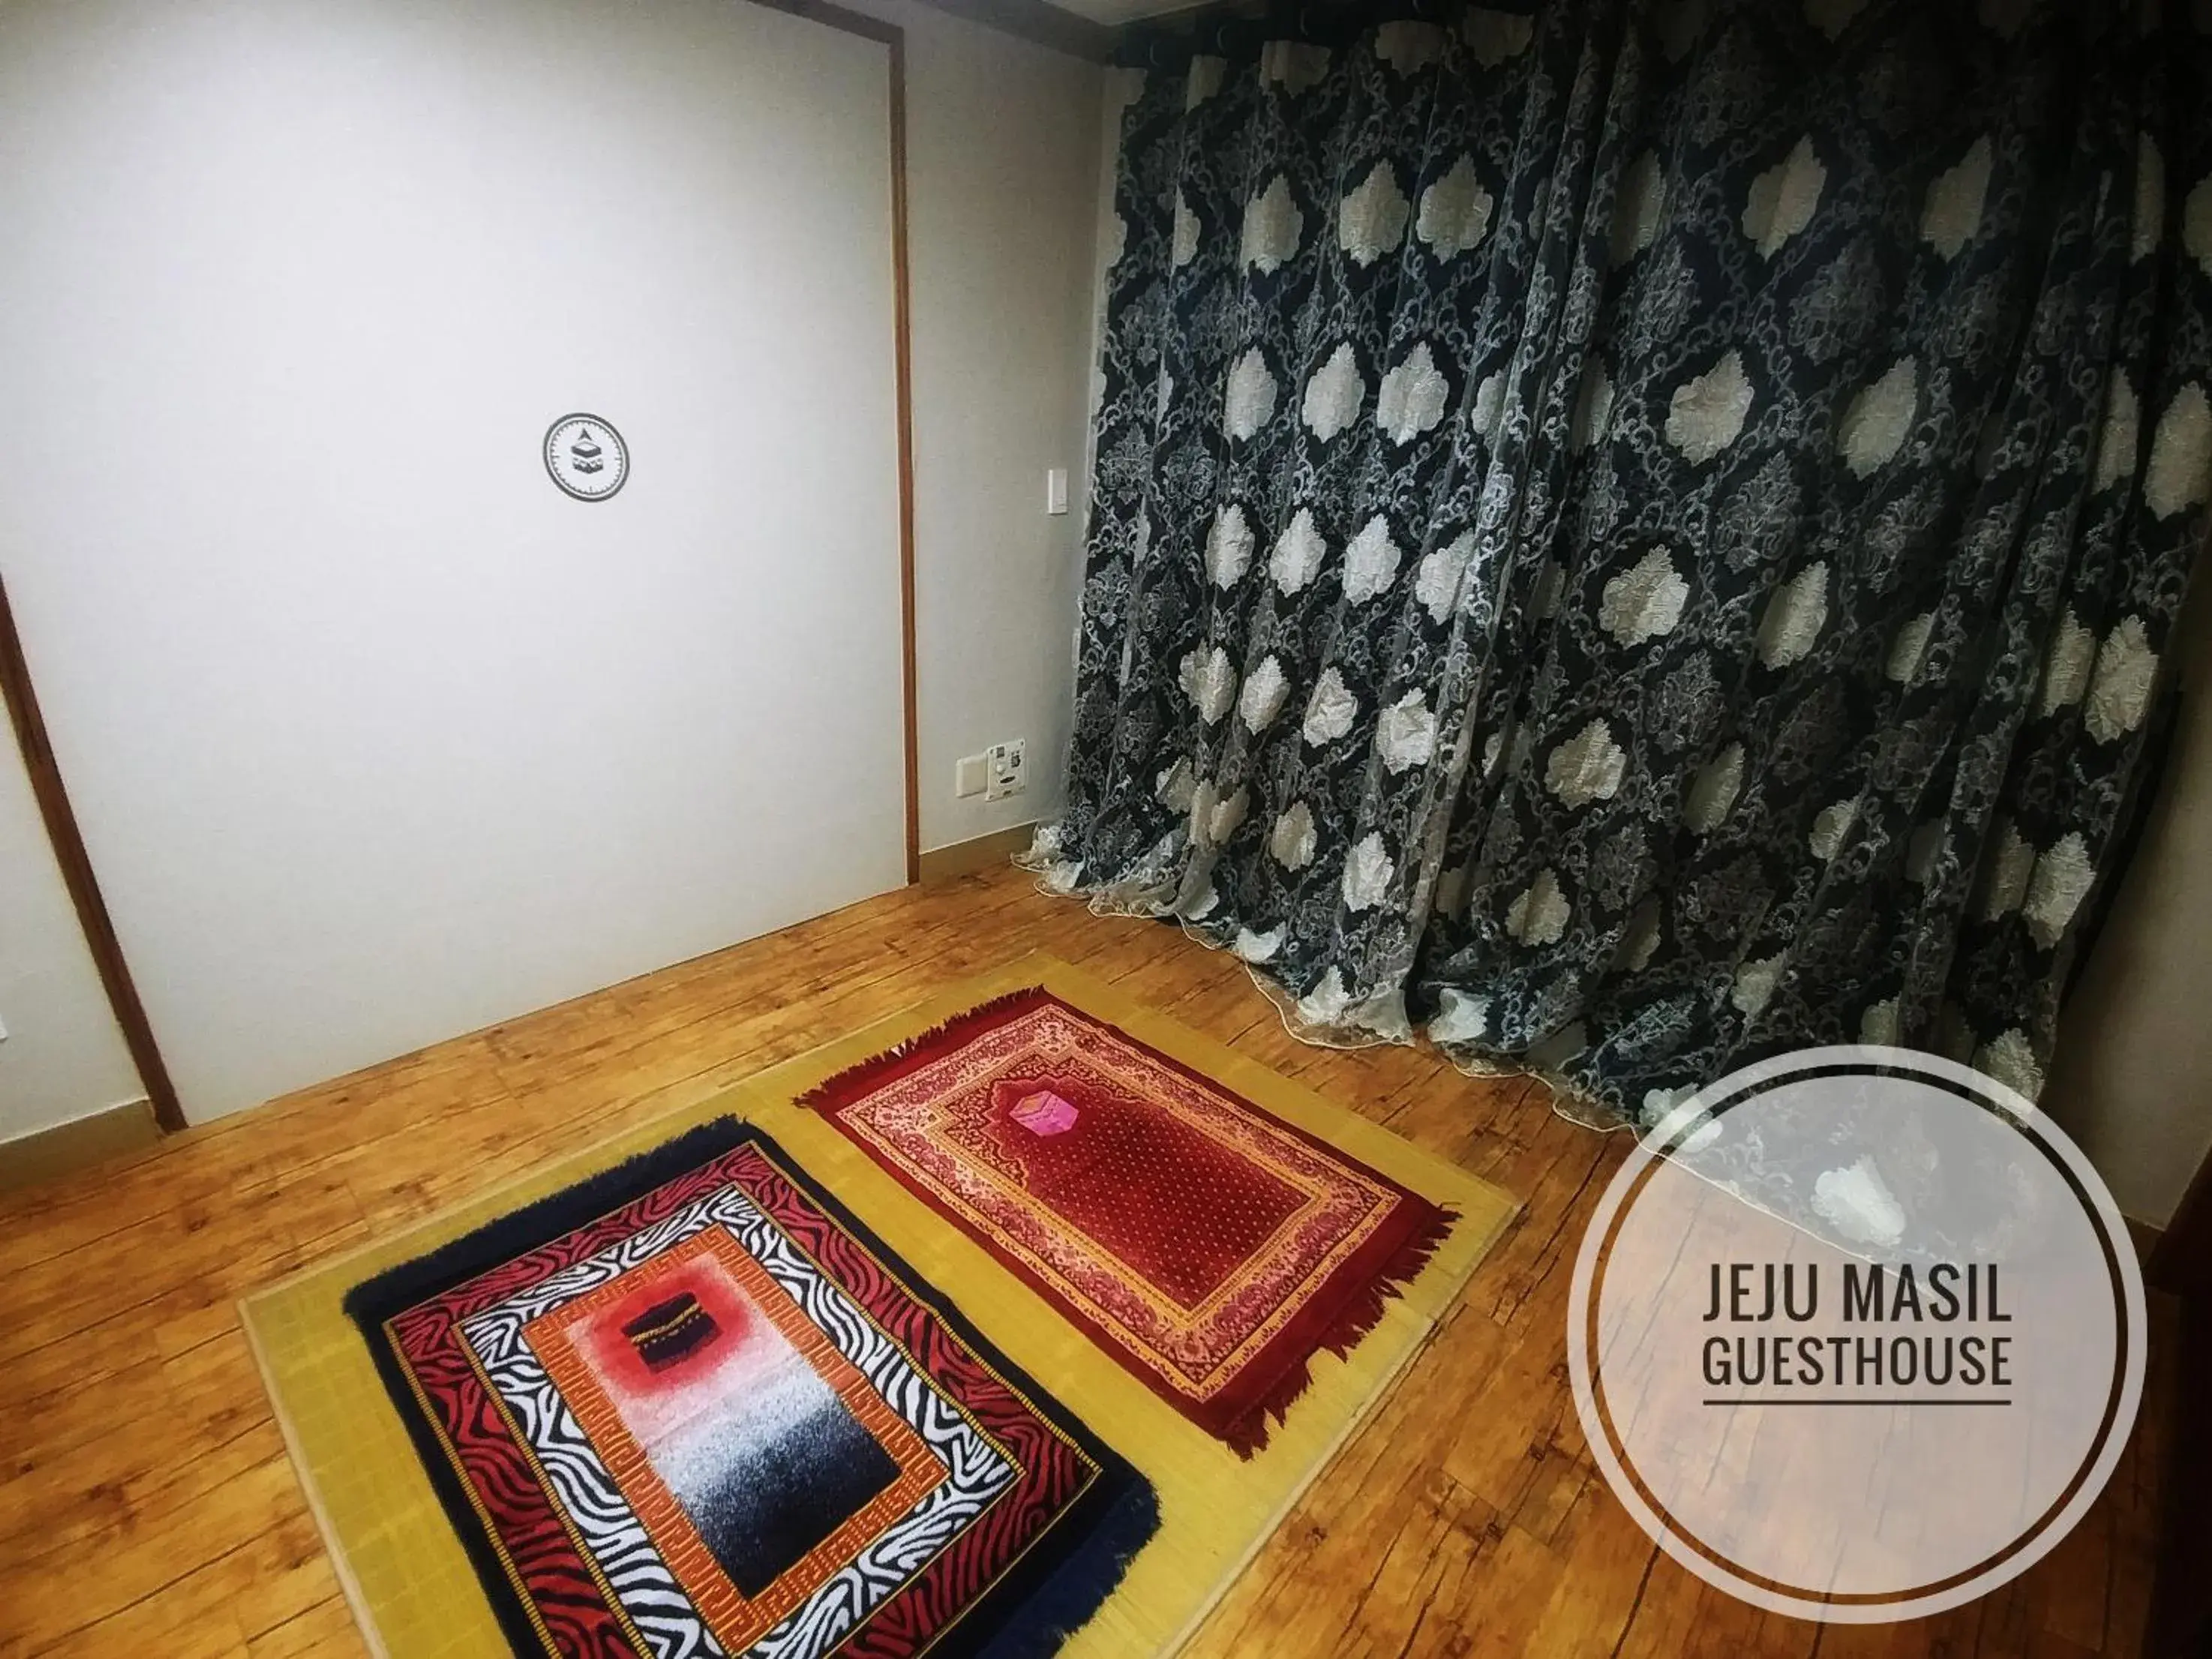 Place of worship in Masil Guesthouse Jeju